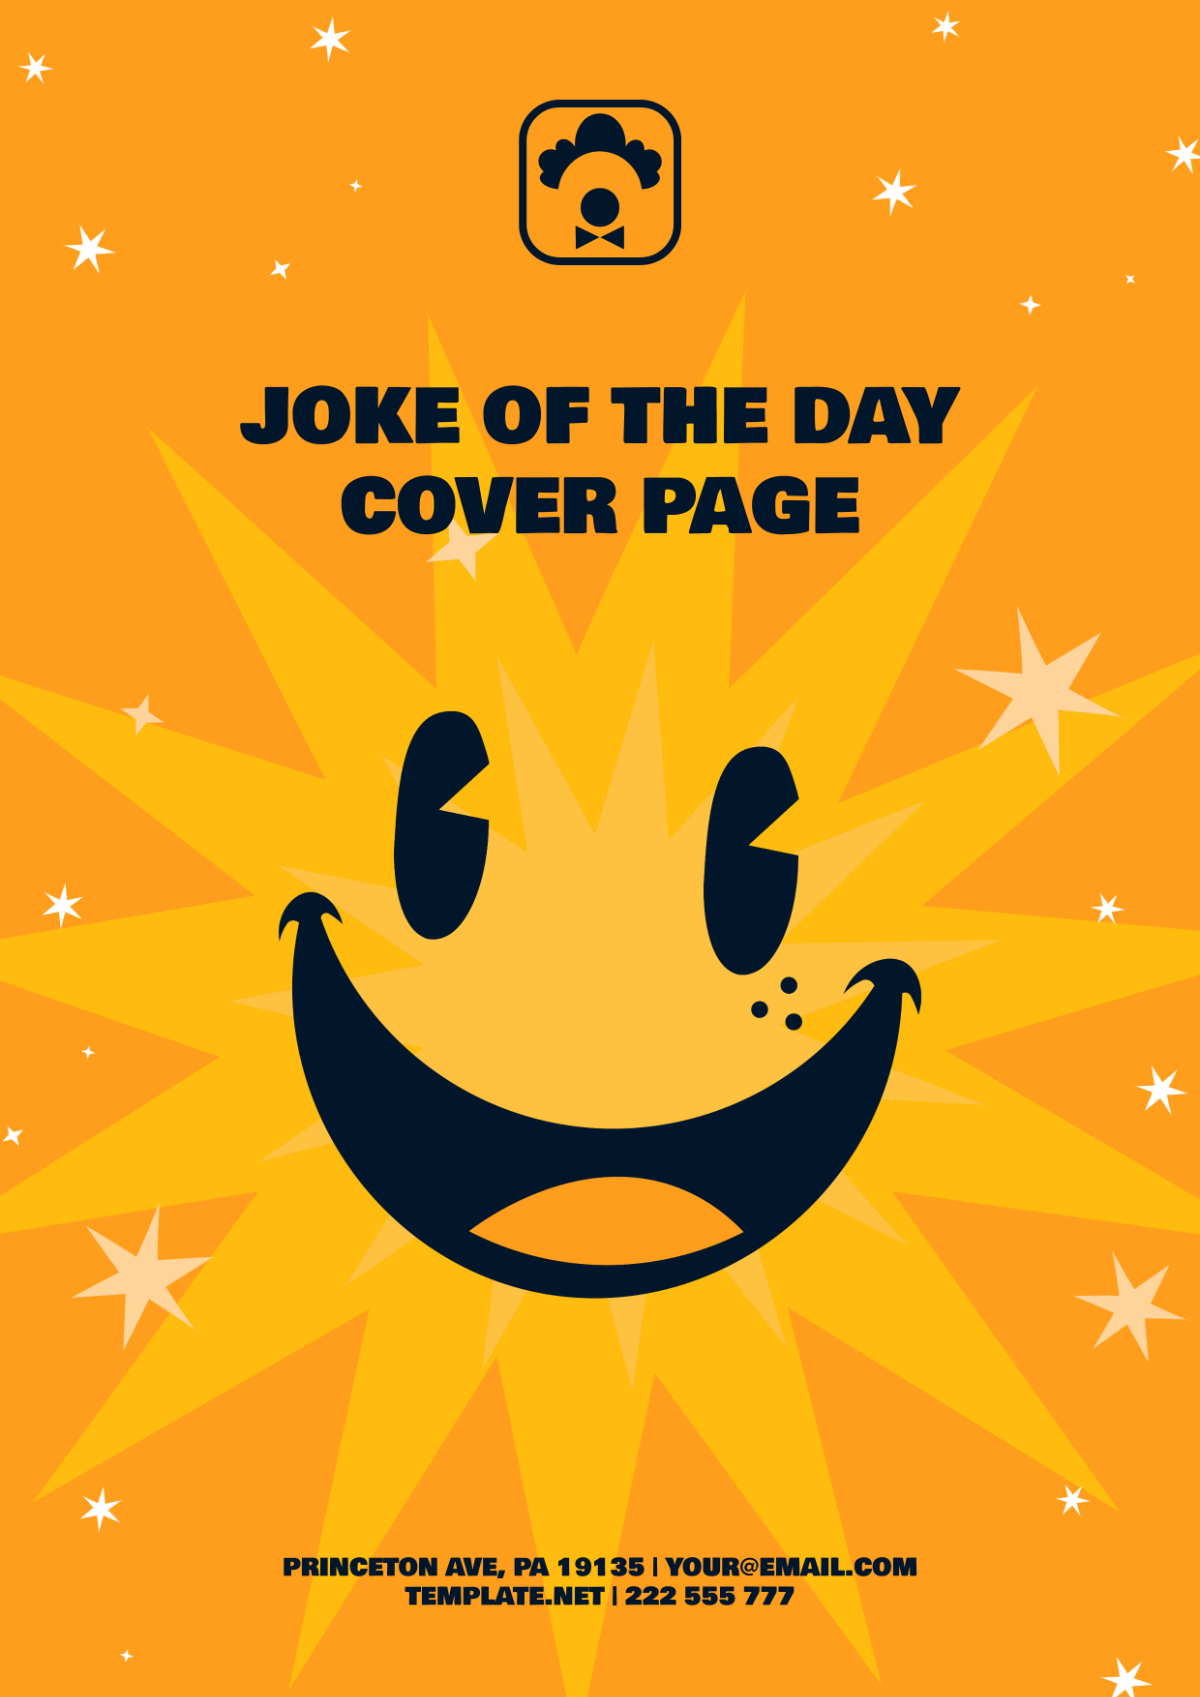 Joke of the Day Cover Page